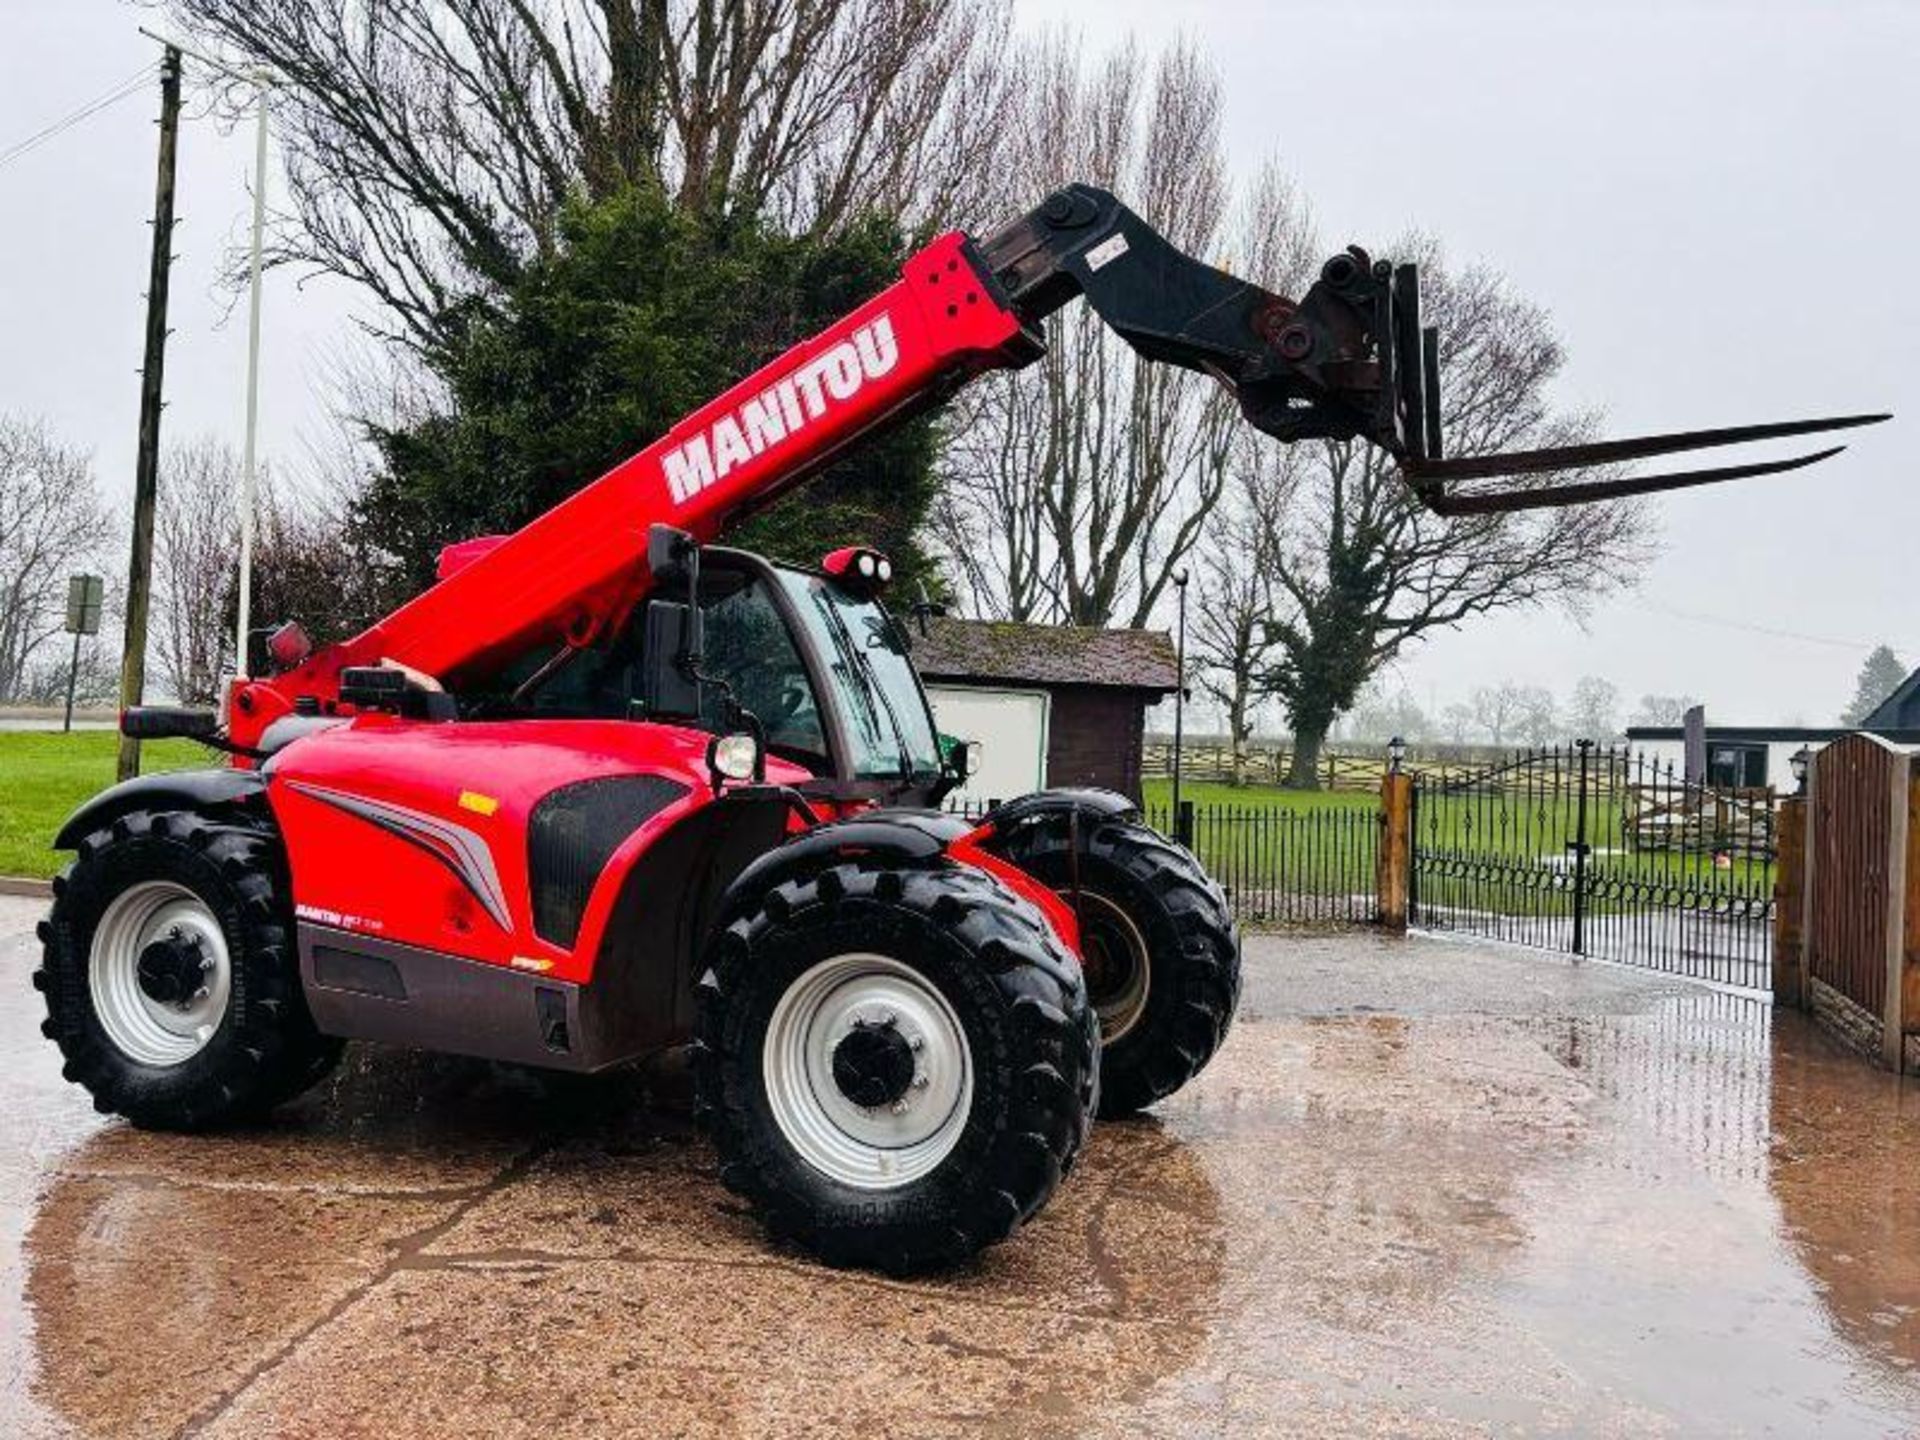 MANITOU MLT735 4WD TELEHANDLER *AG-SPEC, YEAR 2015, 5920 HOURS* C/W PUH